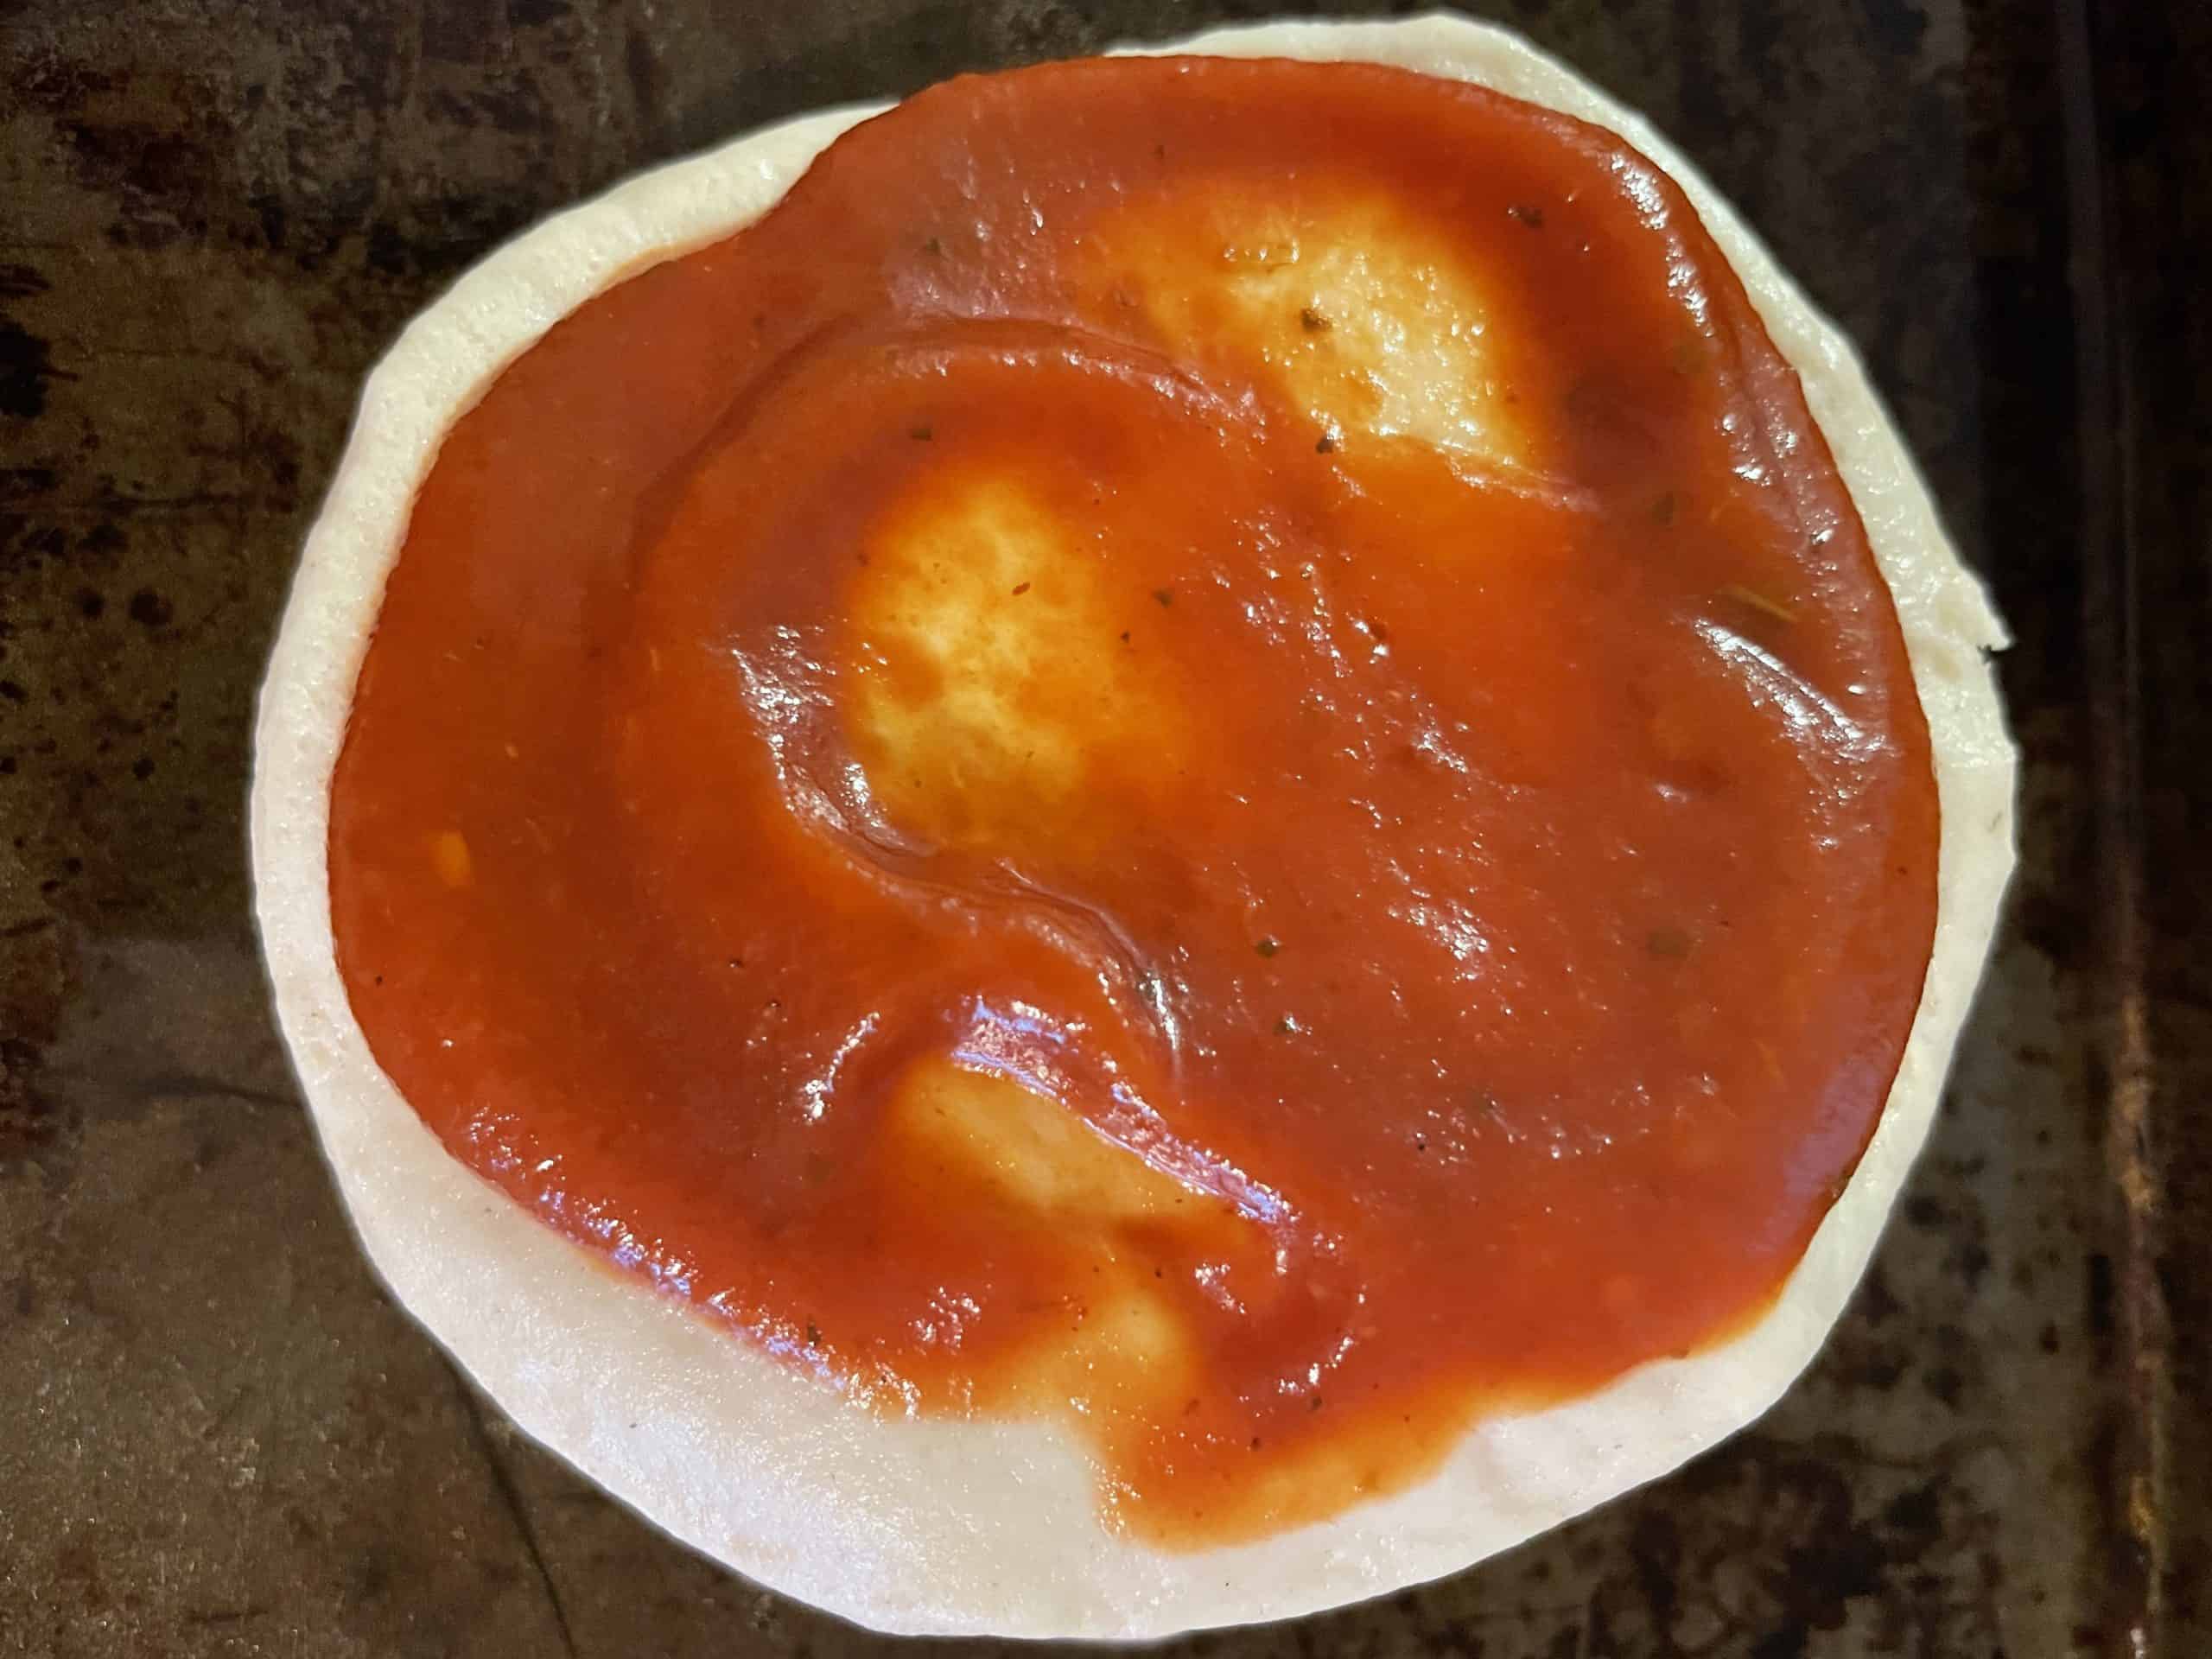 Mini pizza crust topped with pizza sauce.